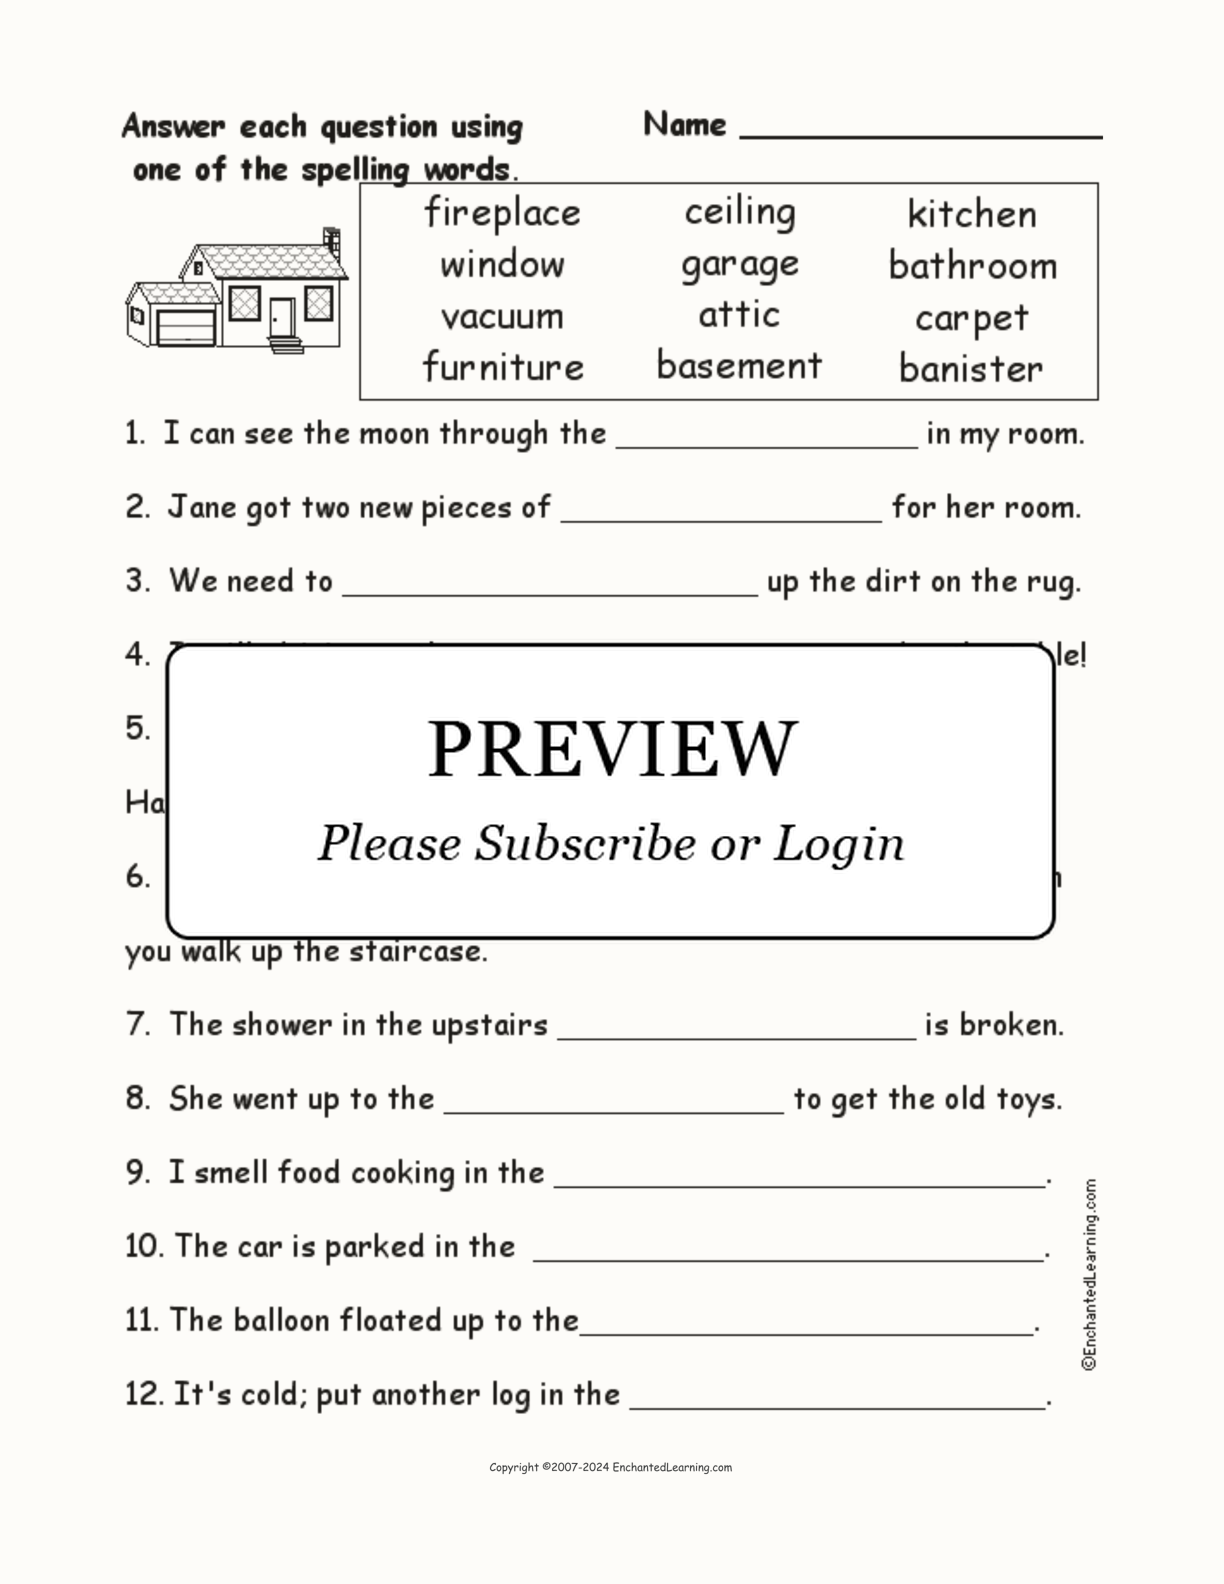 House Spelling Word Questions interactive worksheet page 1